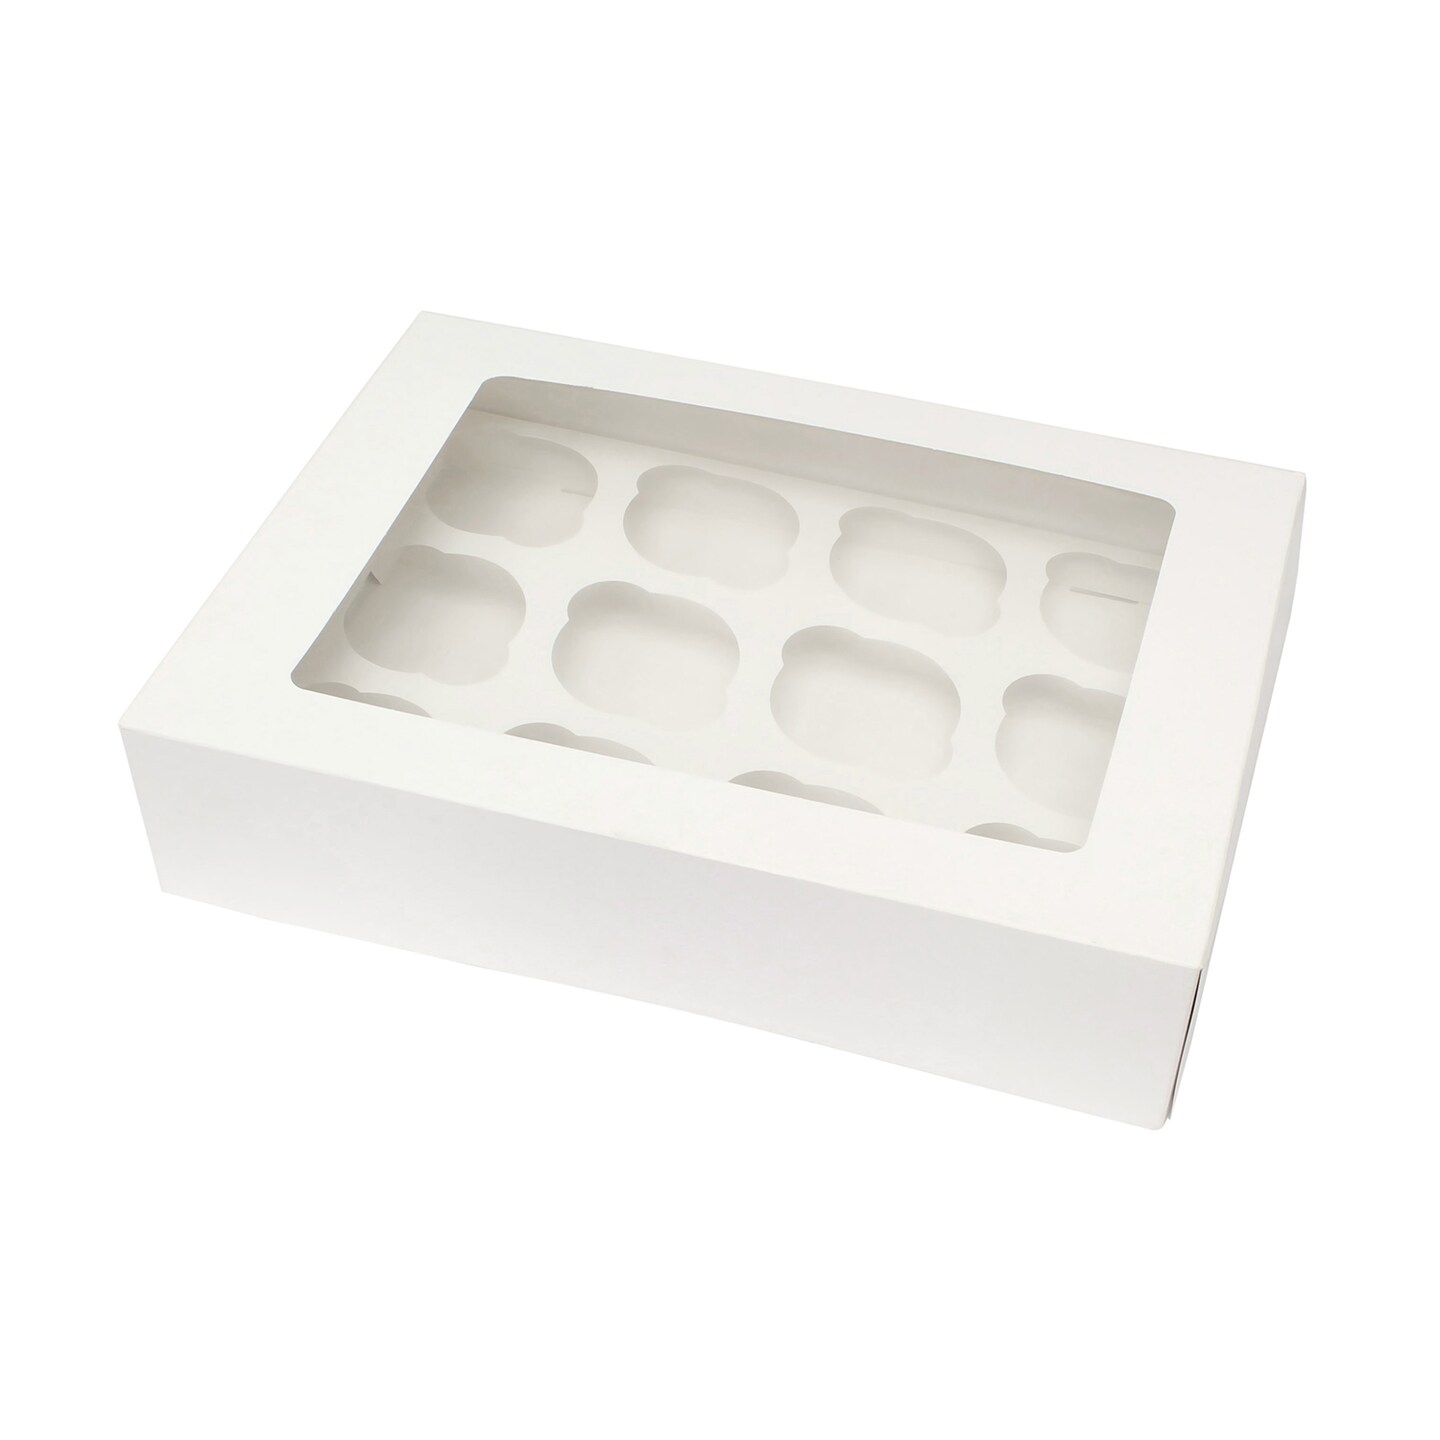 Spec101 | Cupcake Boxes with Insert &#x2013; White Bakery Boxes, Dessert Boxes